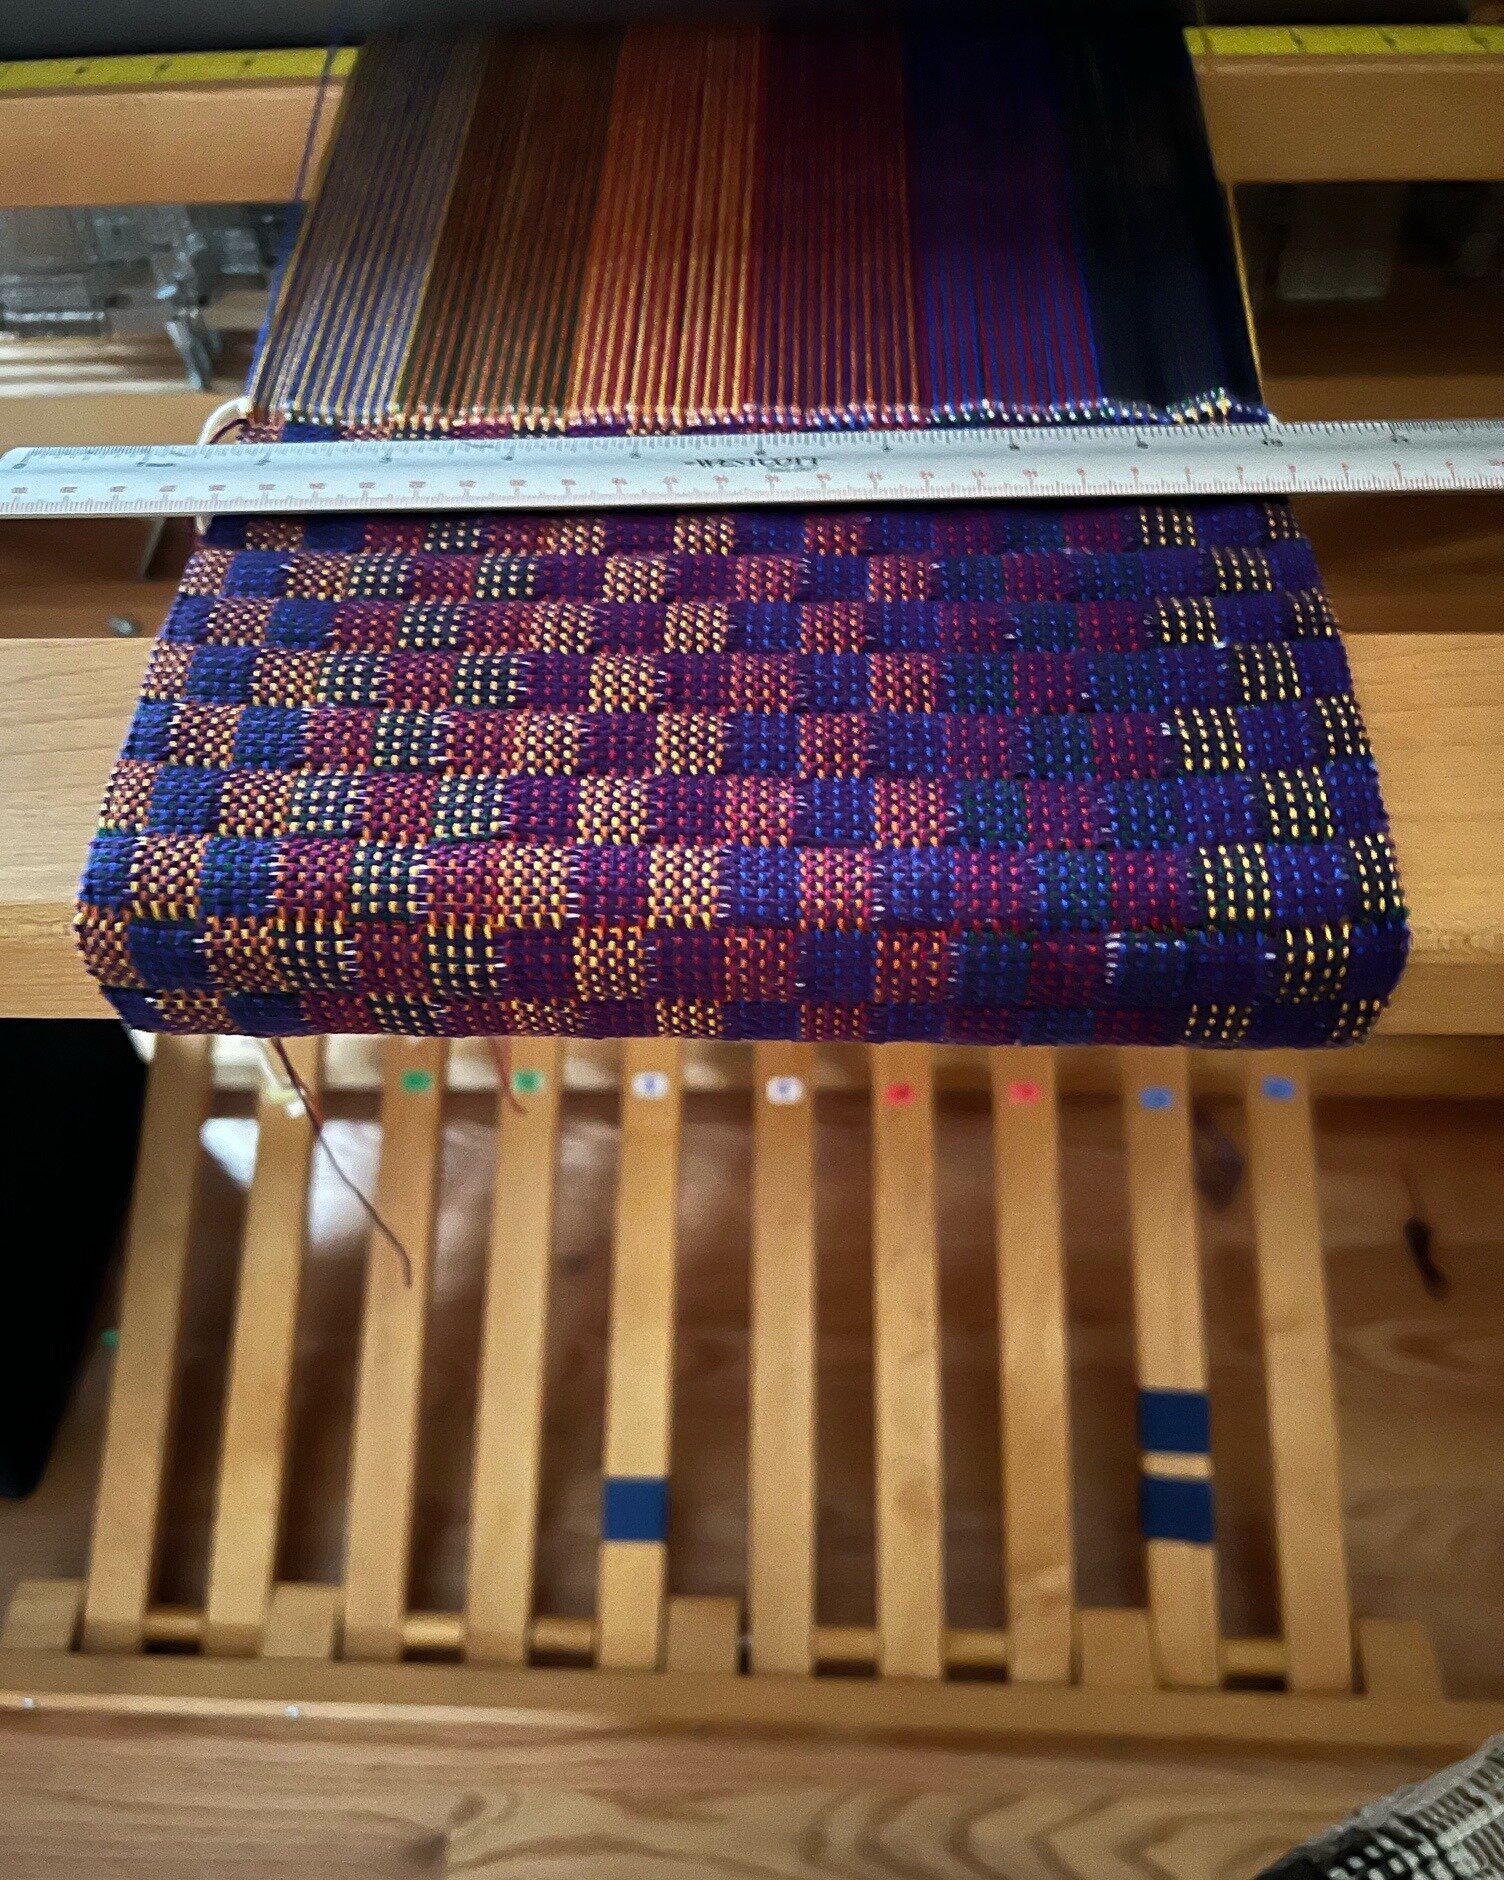 Happy Weaving Wednesday! 
Jan DeMeo shares her results of the Double Rainbow, Double Weaving Workshop with Jennifer Moore. 
Look at all of the beautiful items she created! 
Jan explored many of the techniques taught in the class - multiple blocks, th